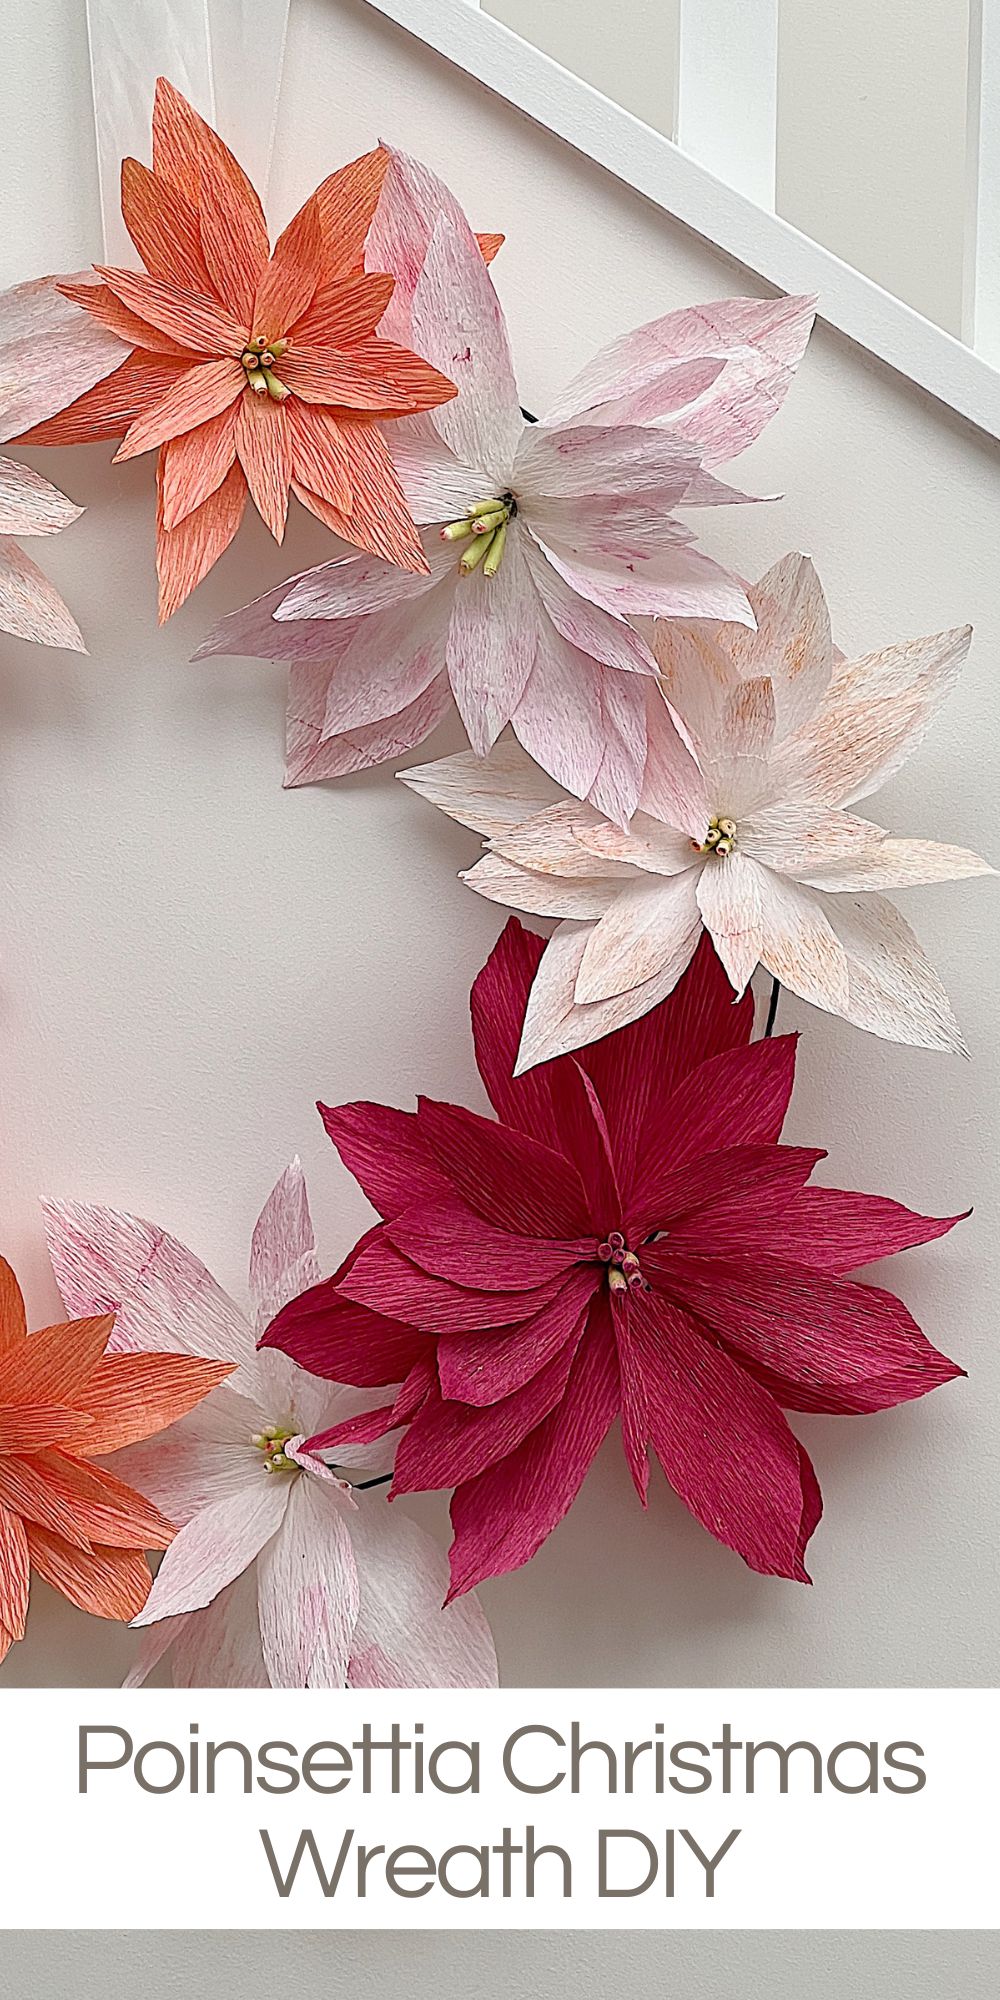 This year, I decided to bring a handmade touch to our holiday decorations by creating a stunning poinsettia Christmas wreath.